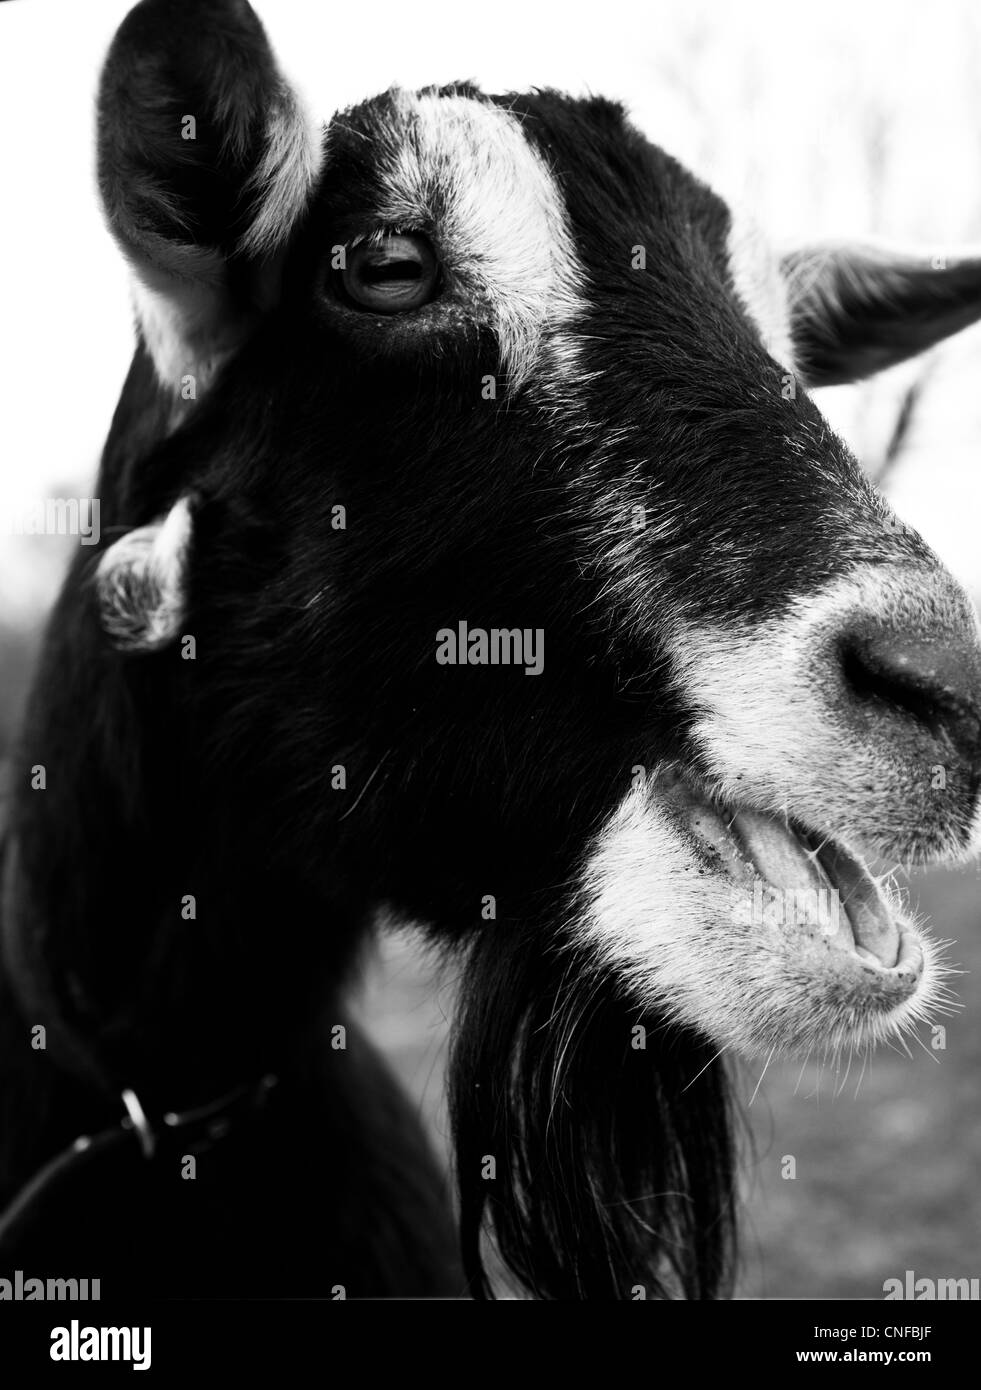 Headshot of goat in black and white Stock Photo